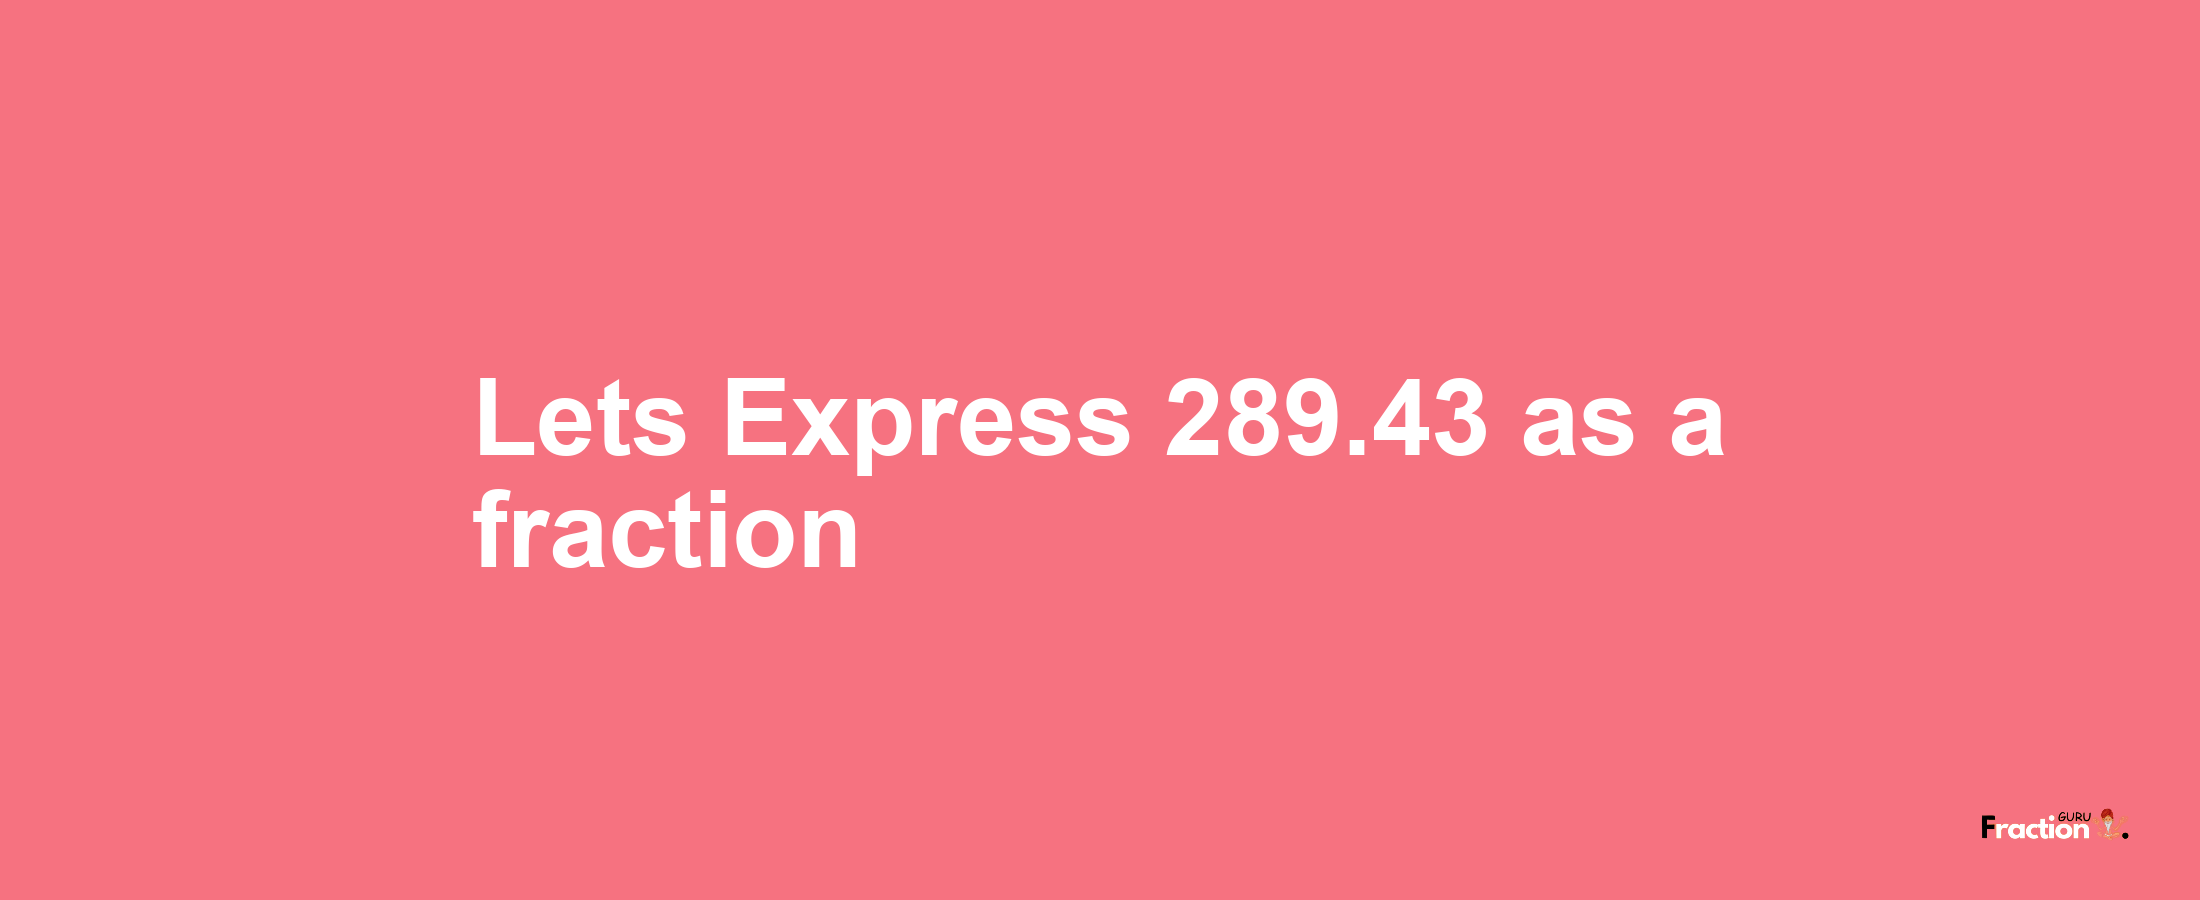 Lets Express 289.43 as afraction